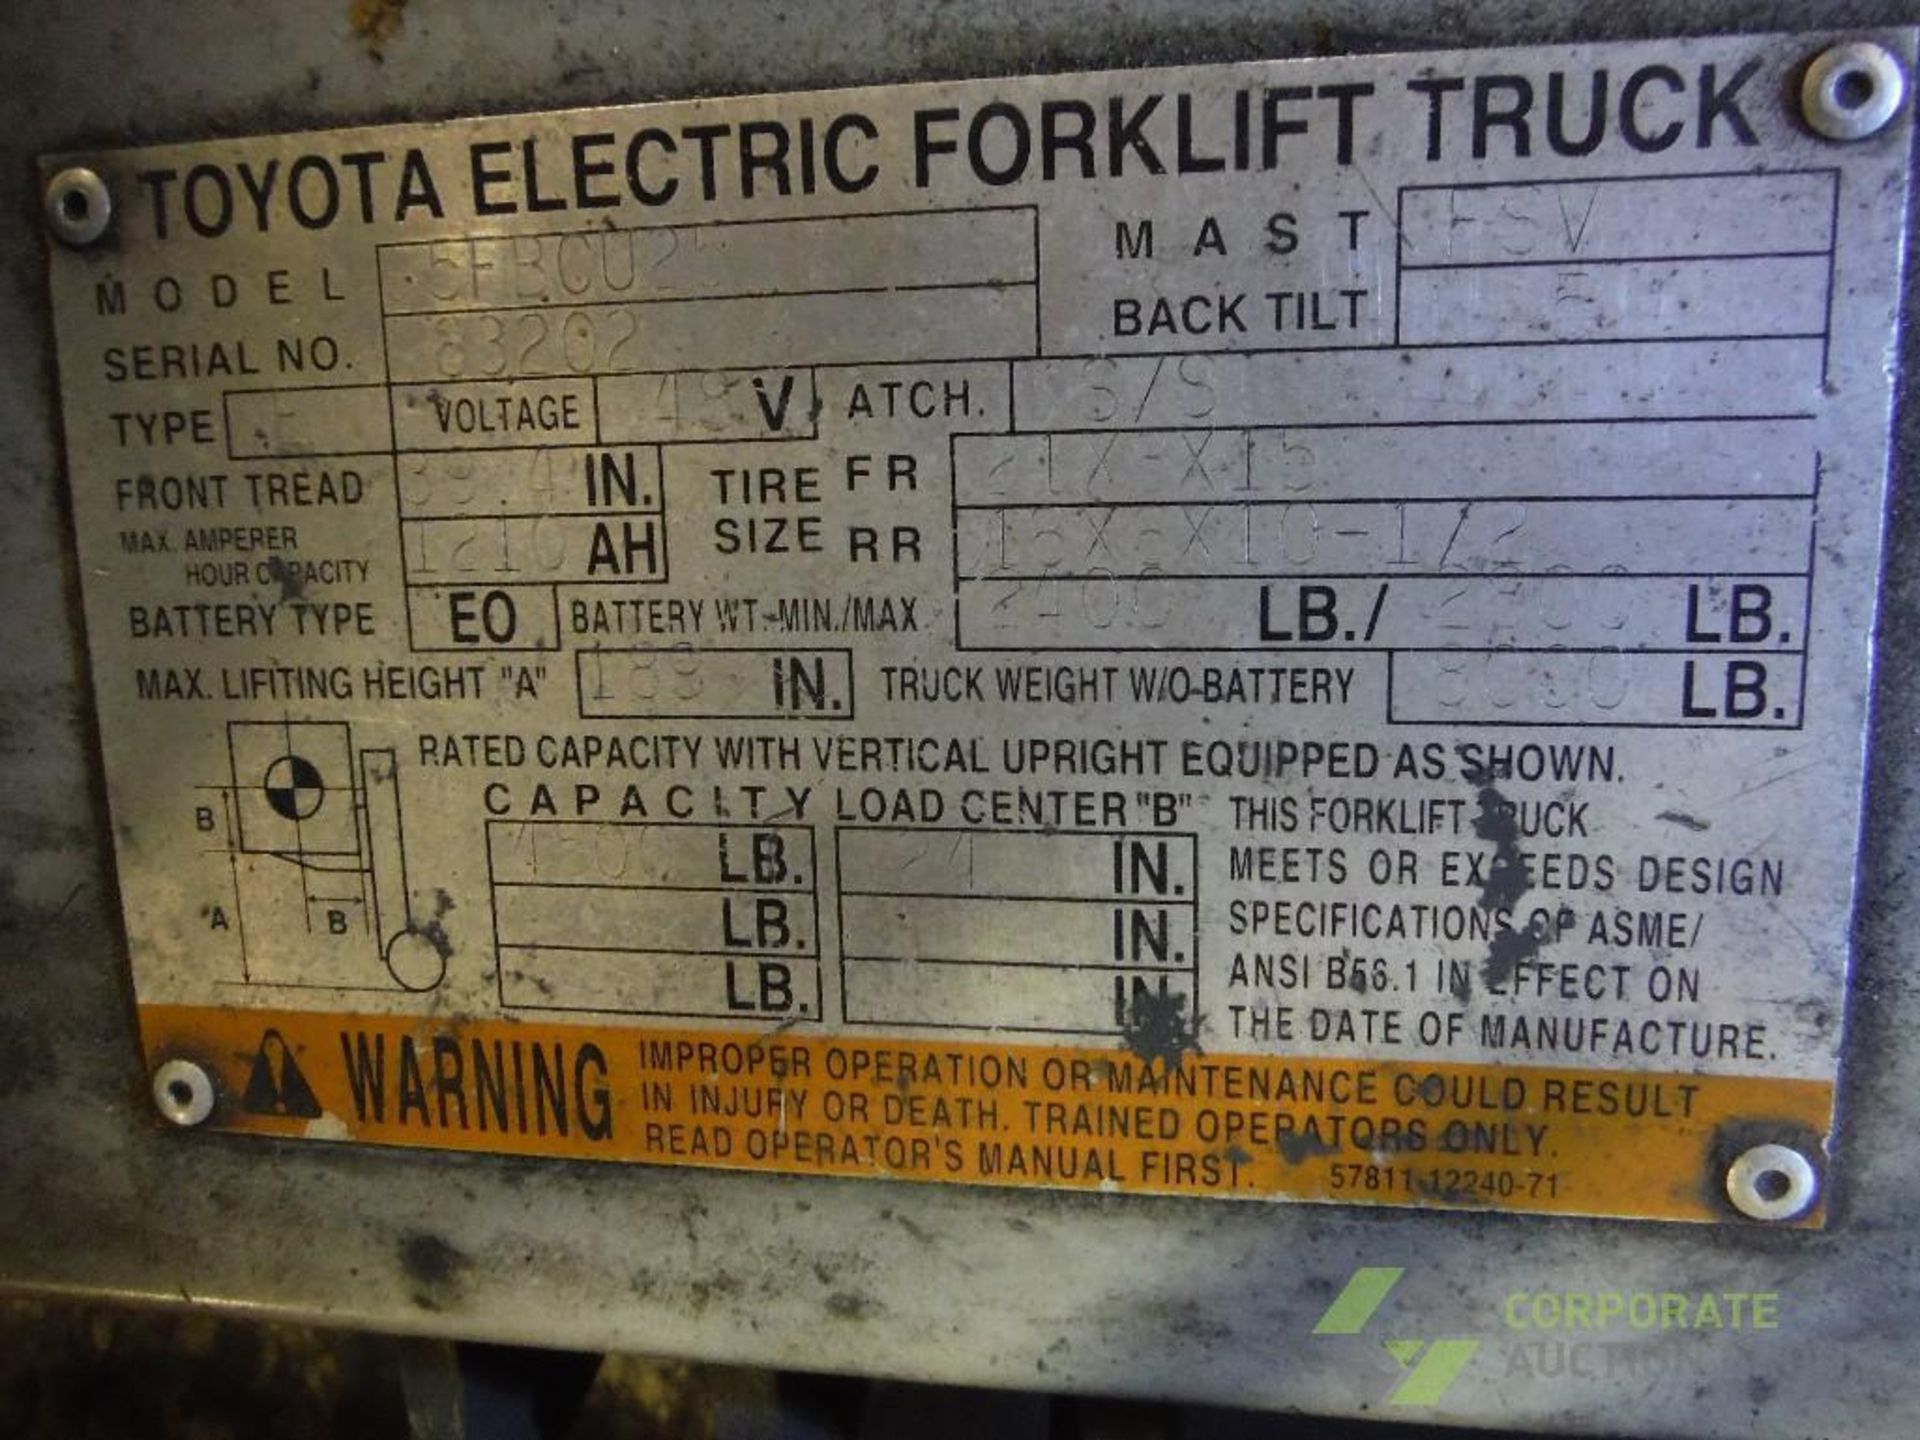 Toyota 48 volt electric fork lift, Model 5FBCU25, SN 63202, 4500 lb. capacity, 3 stage mast, 188 in. - Image 6 of 7